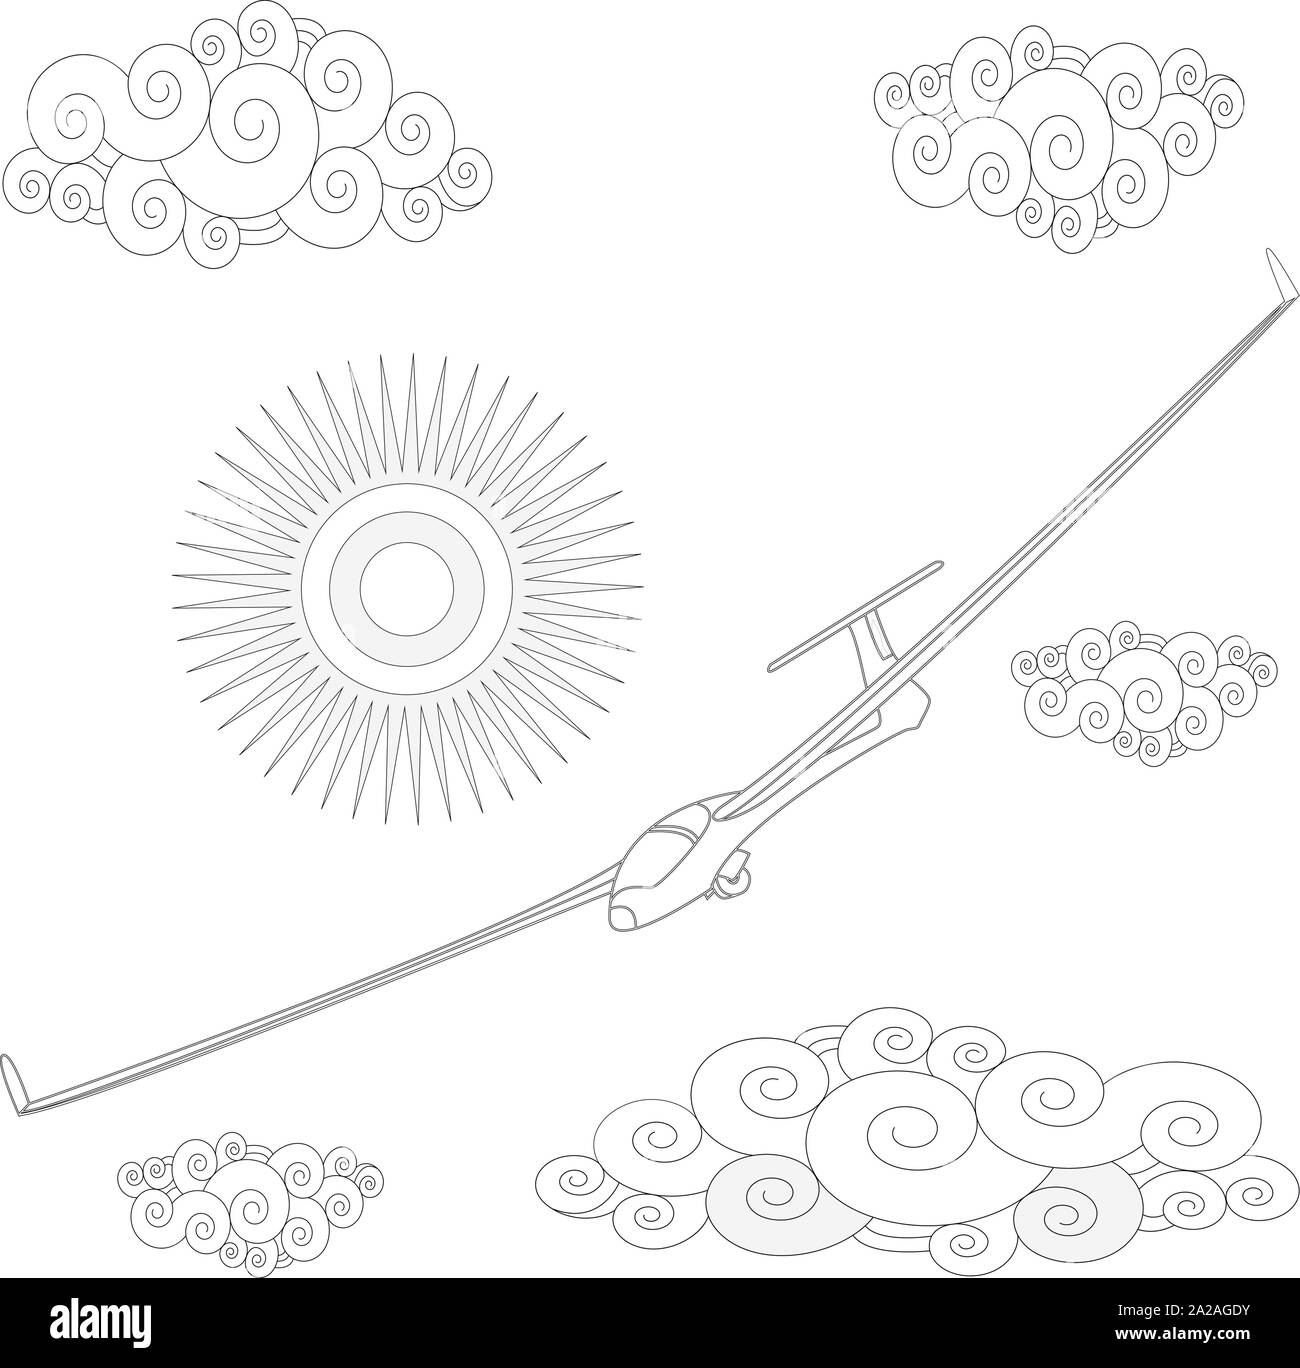 Glider. Coloring image of glider in the sky. Vector illustration. Stock Vector